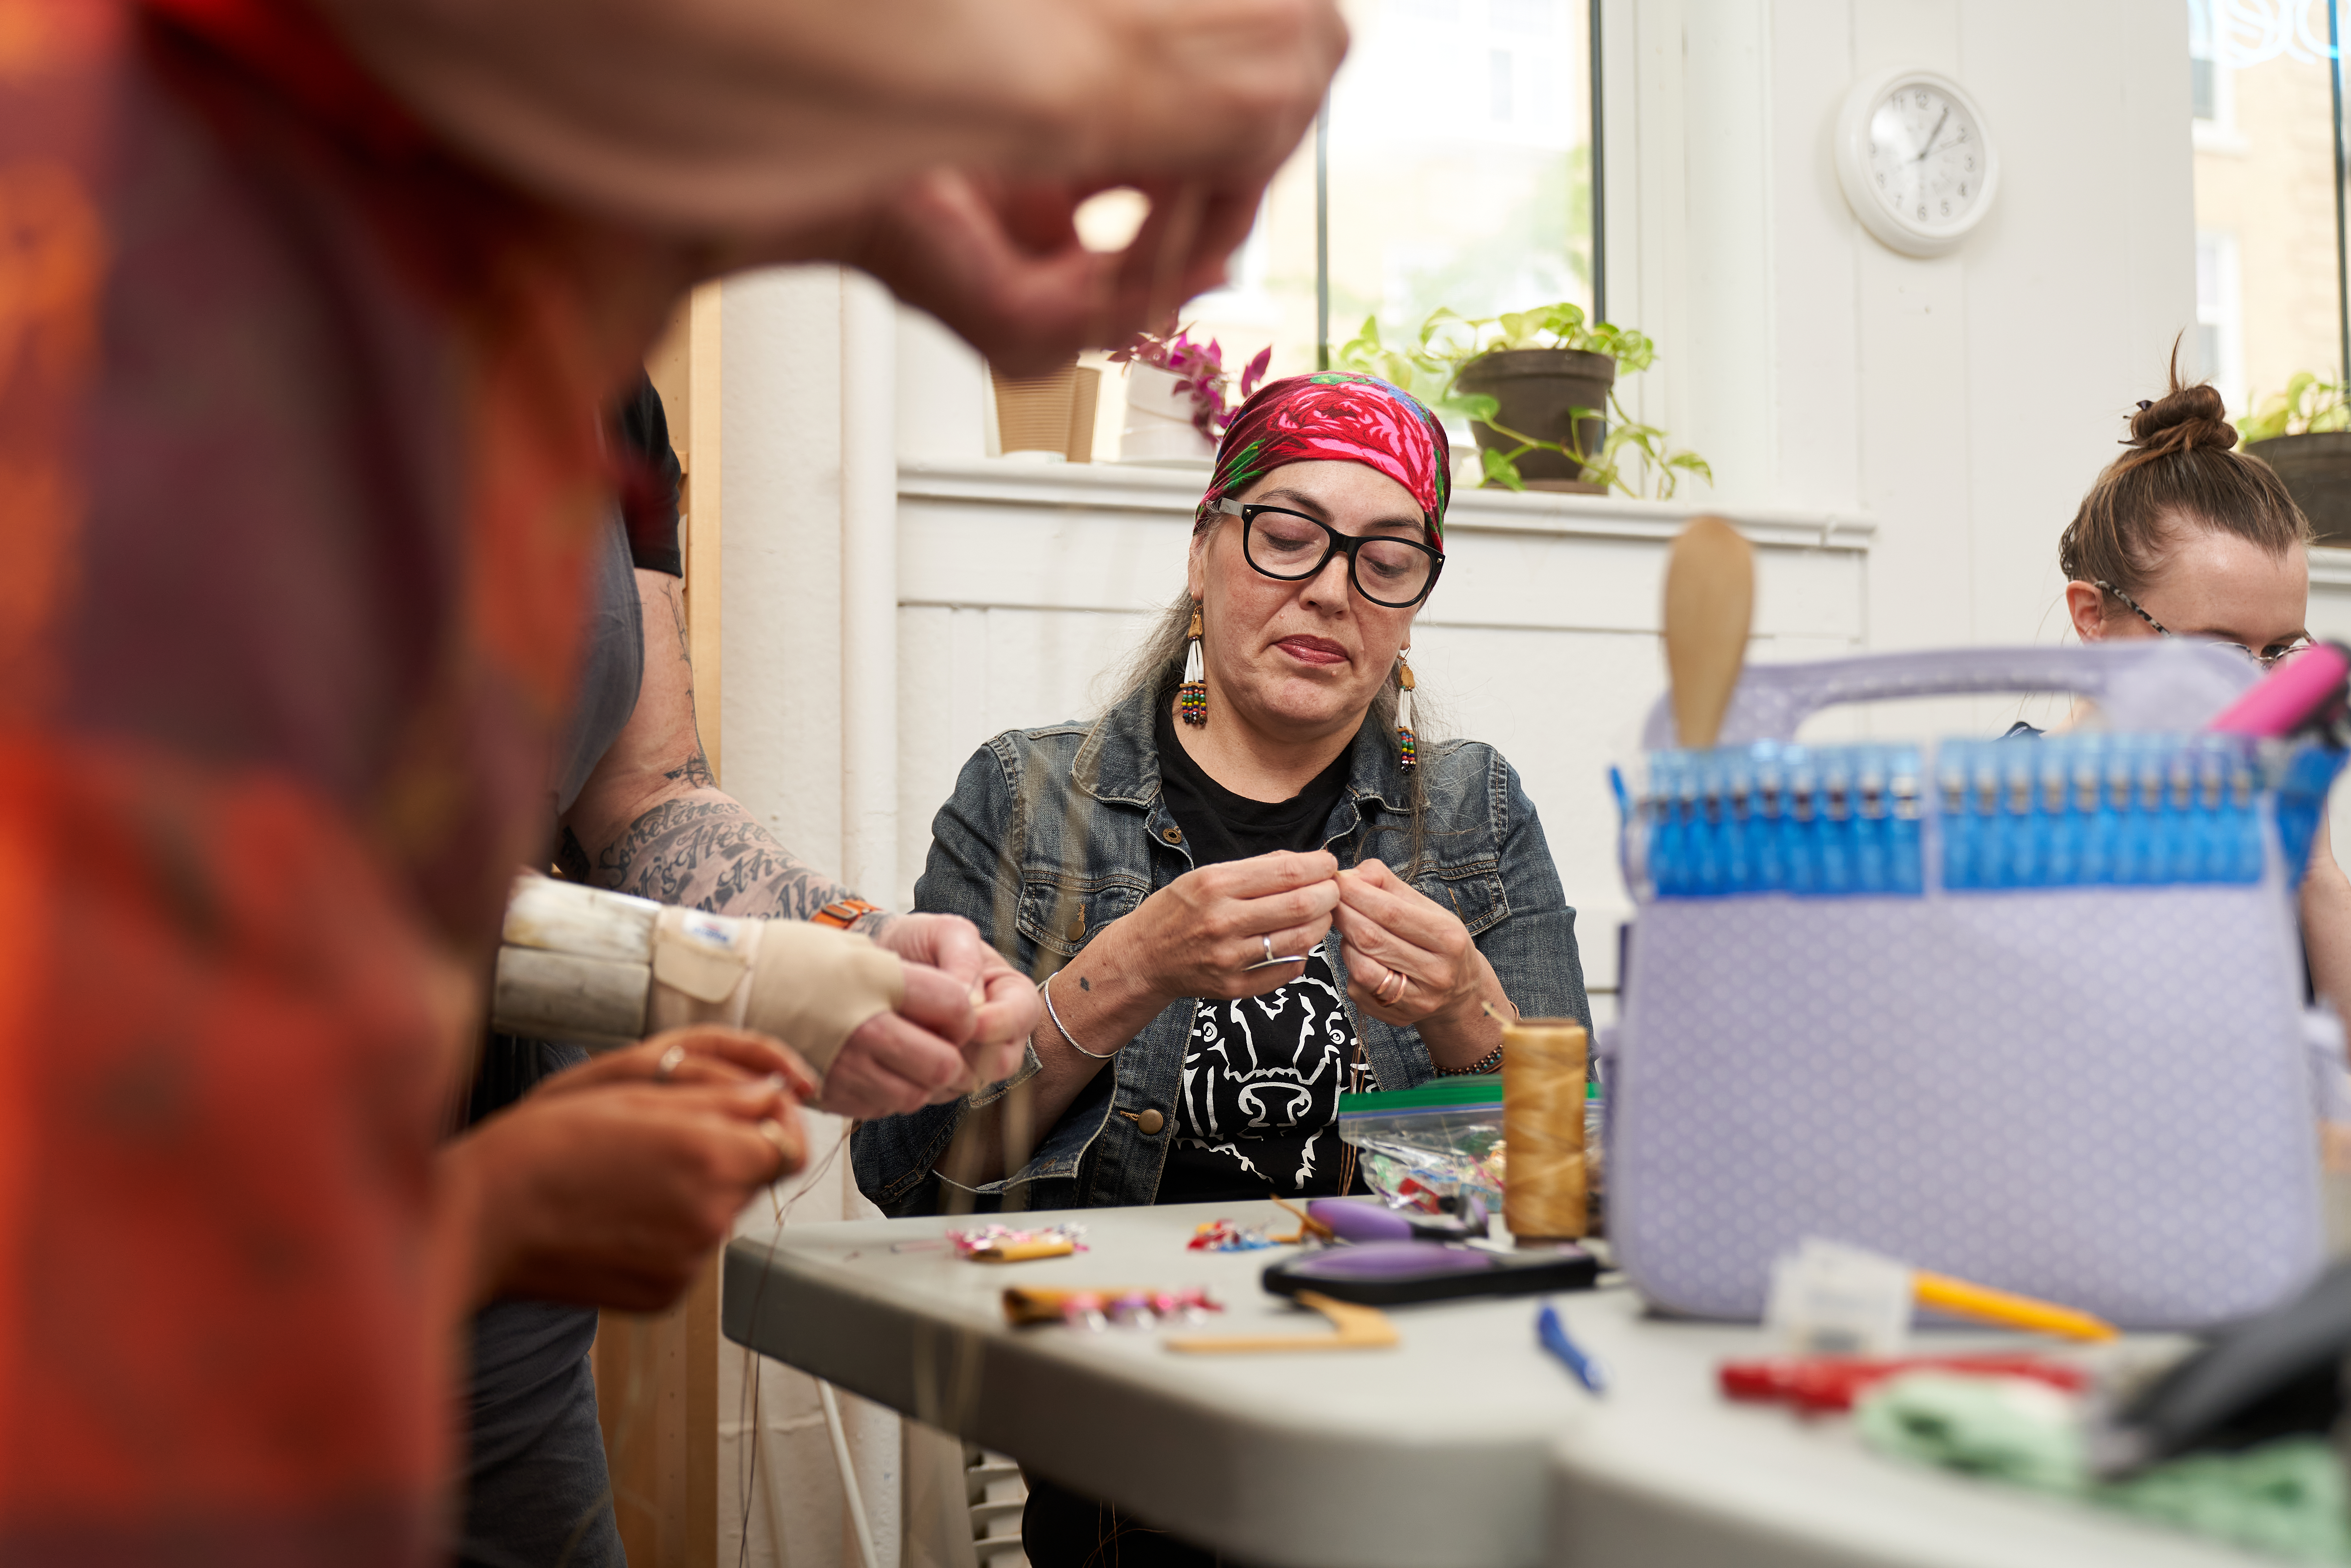 A woman with glasses, a bandana and long earrings works on a pair of mittens.